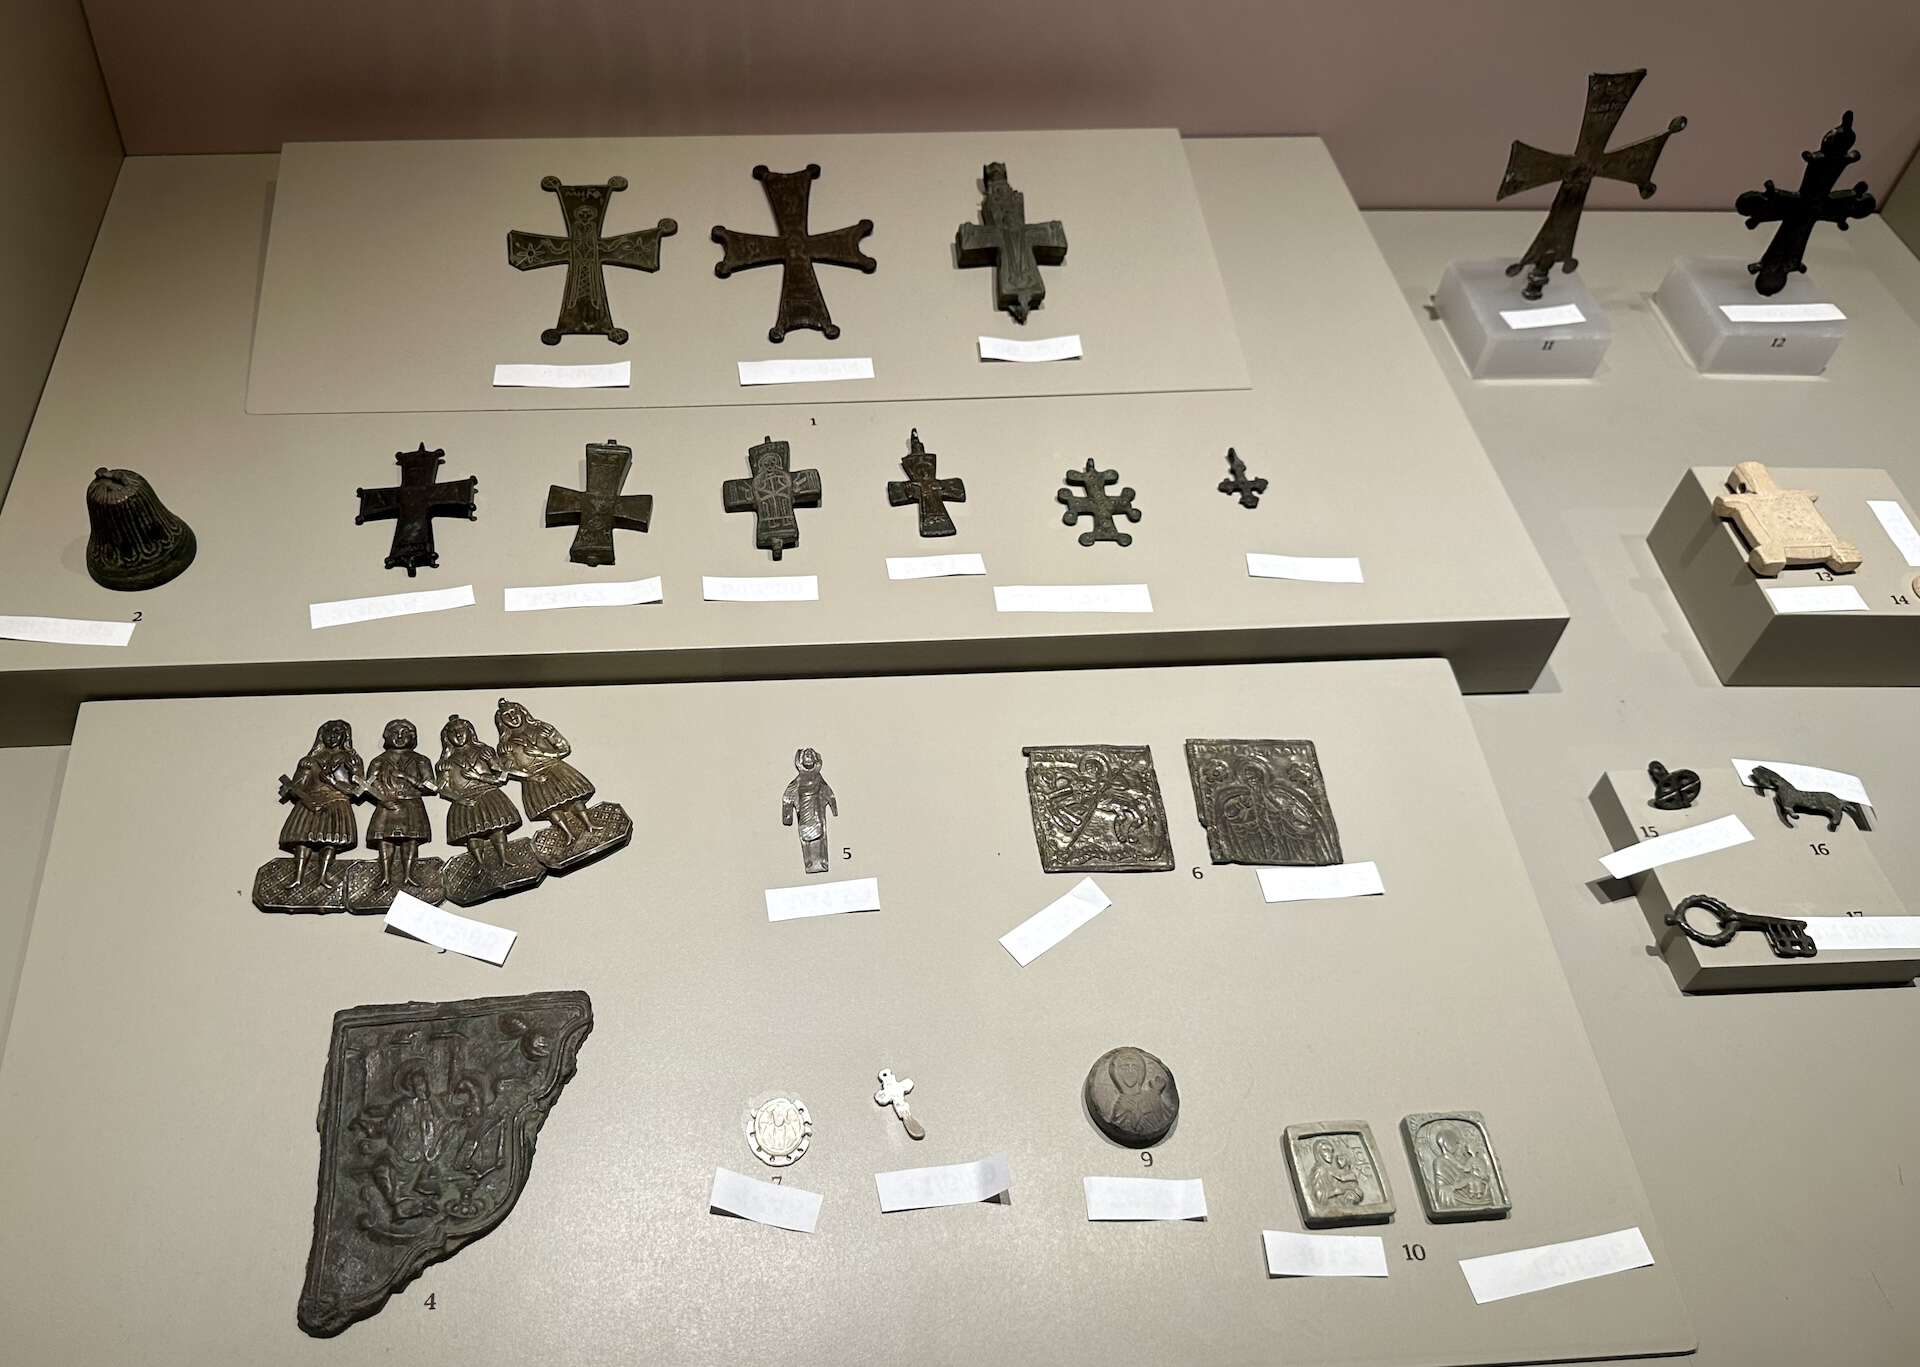 Crosses and icons (3rd to 7th century) in Ephesus Through the Ages at the Ephesus Museum in Selçuk, Turkey